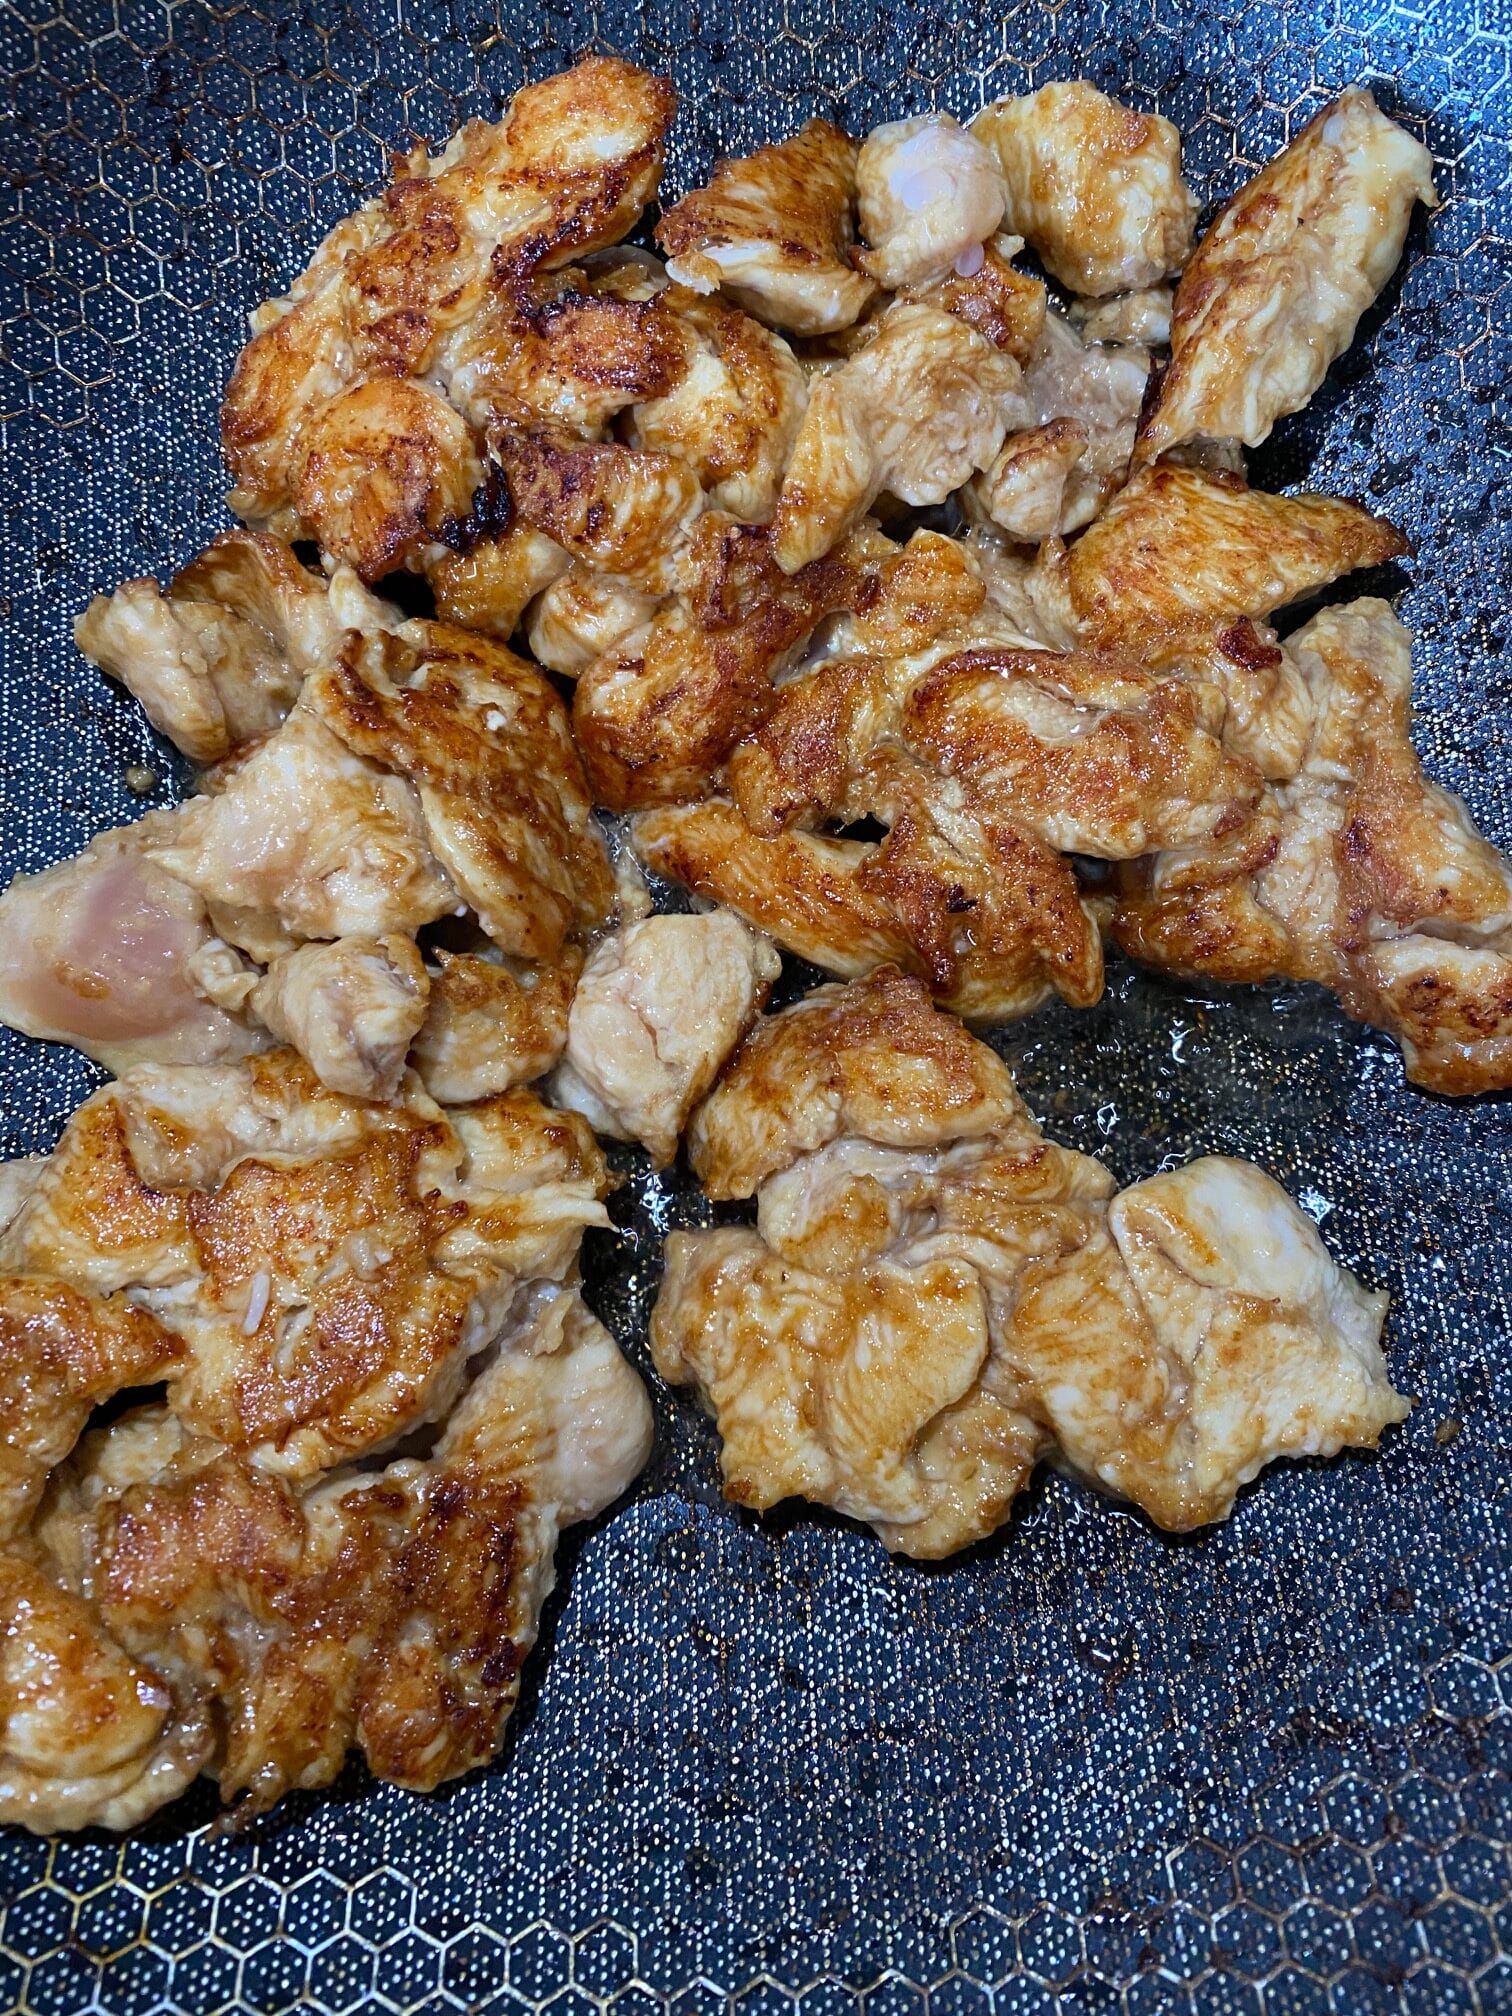 chicken cooked with corn starch, soy sauce, and spices in a wok